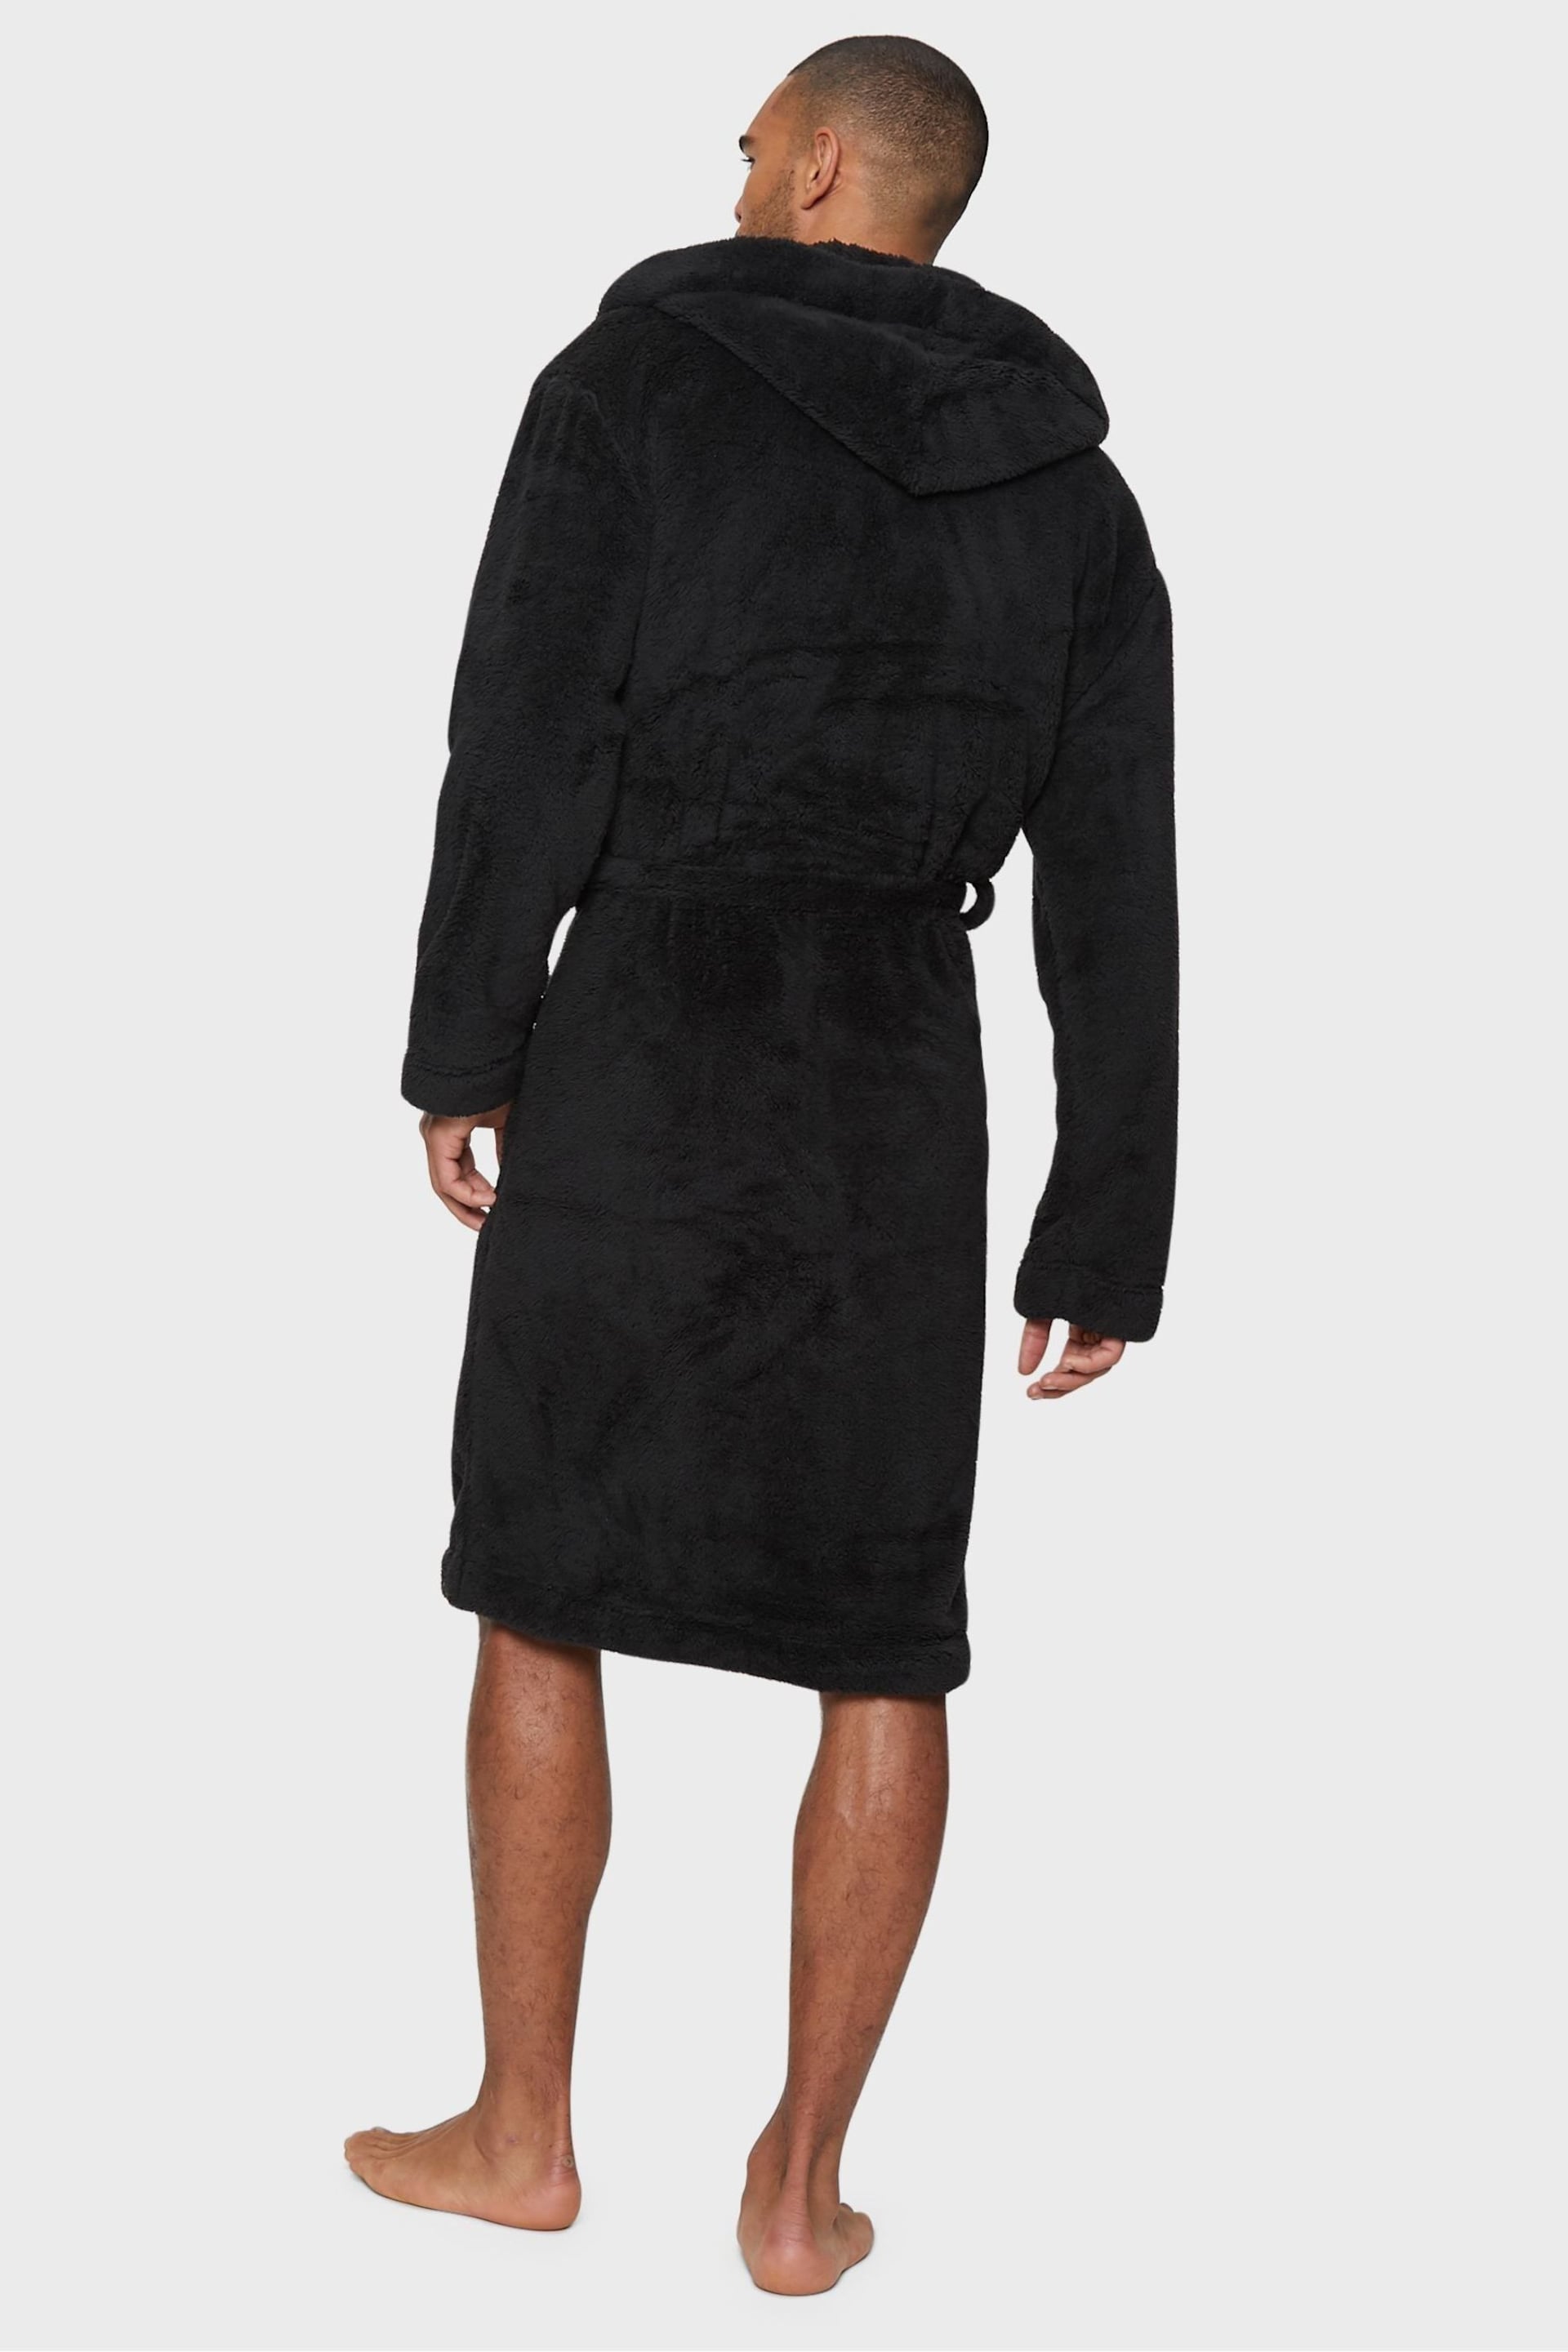 Threadbare Black Cosy Hooded Dressing Gown - Image 3 of 4